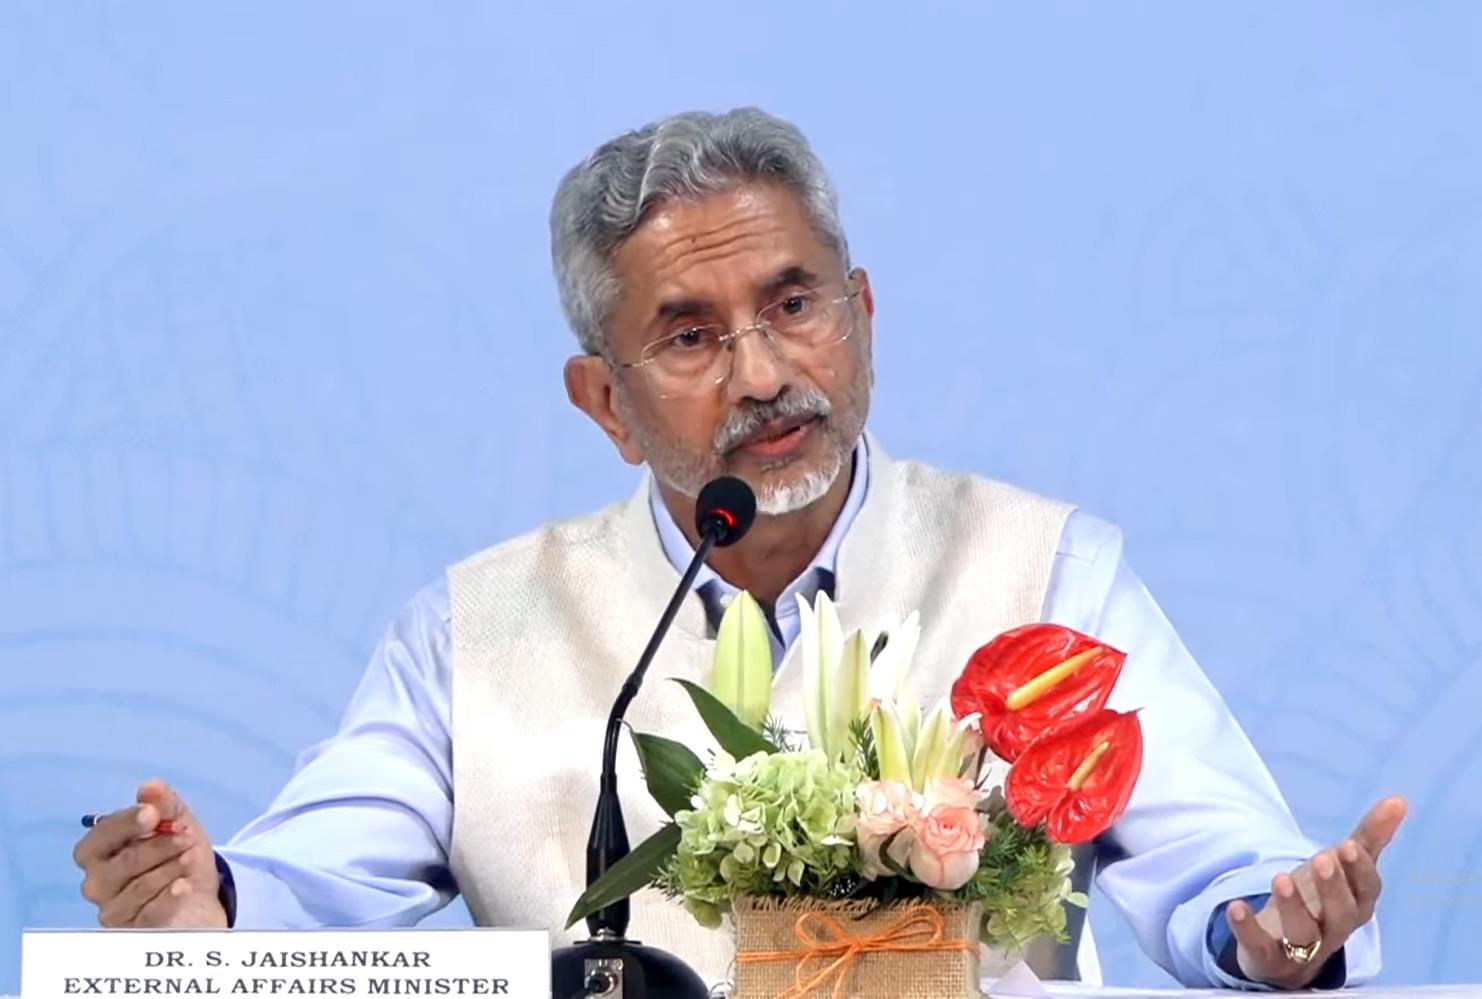  Giving Space To Extremist Elements Not Good For Canada, Says Jaishankar 